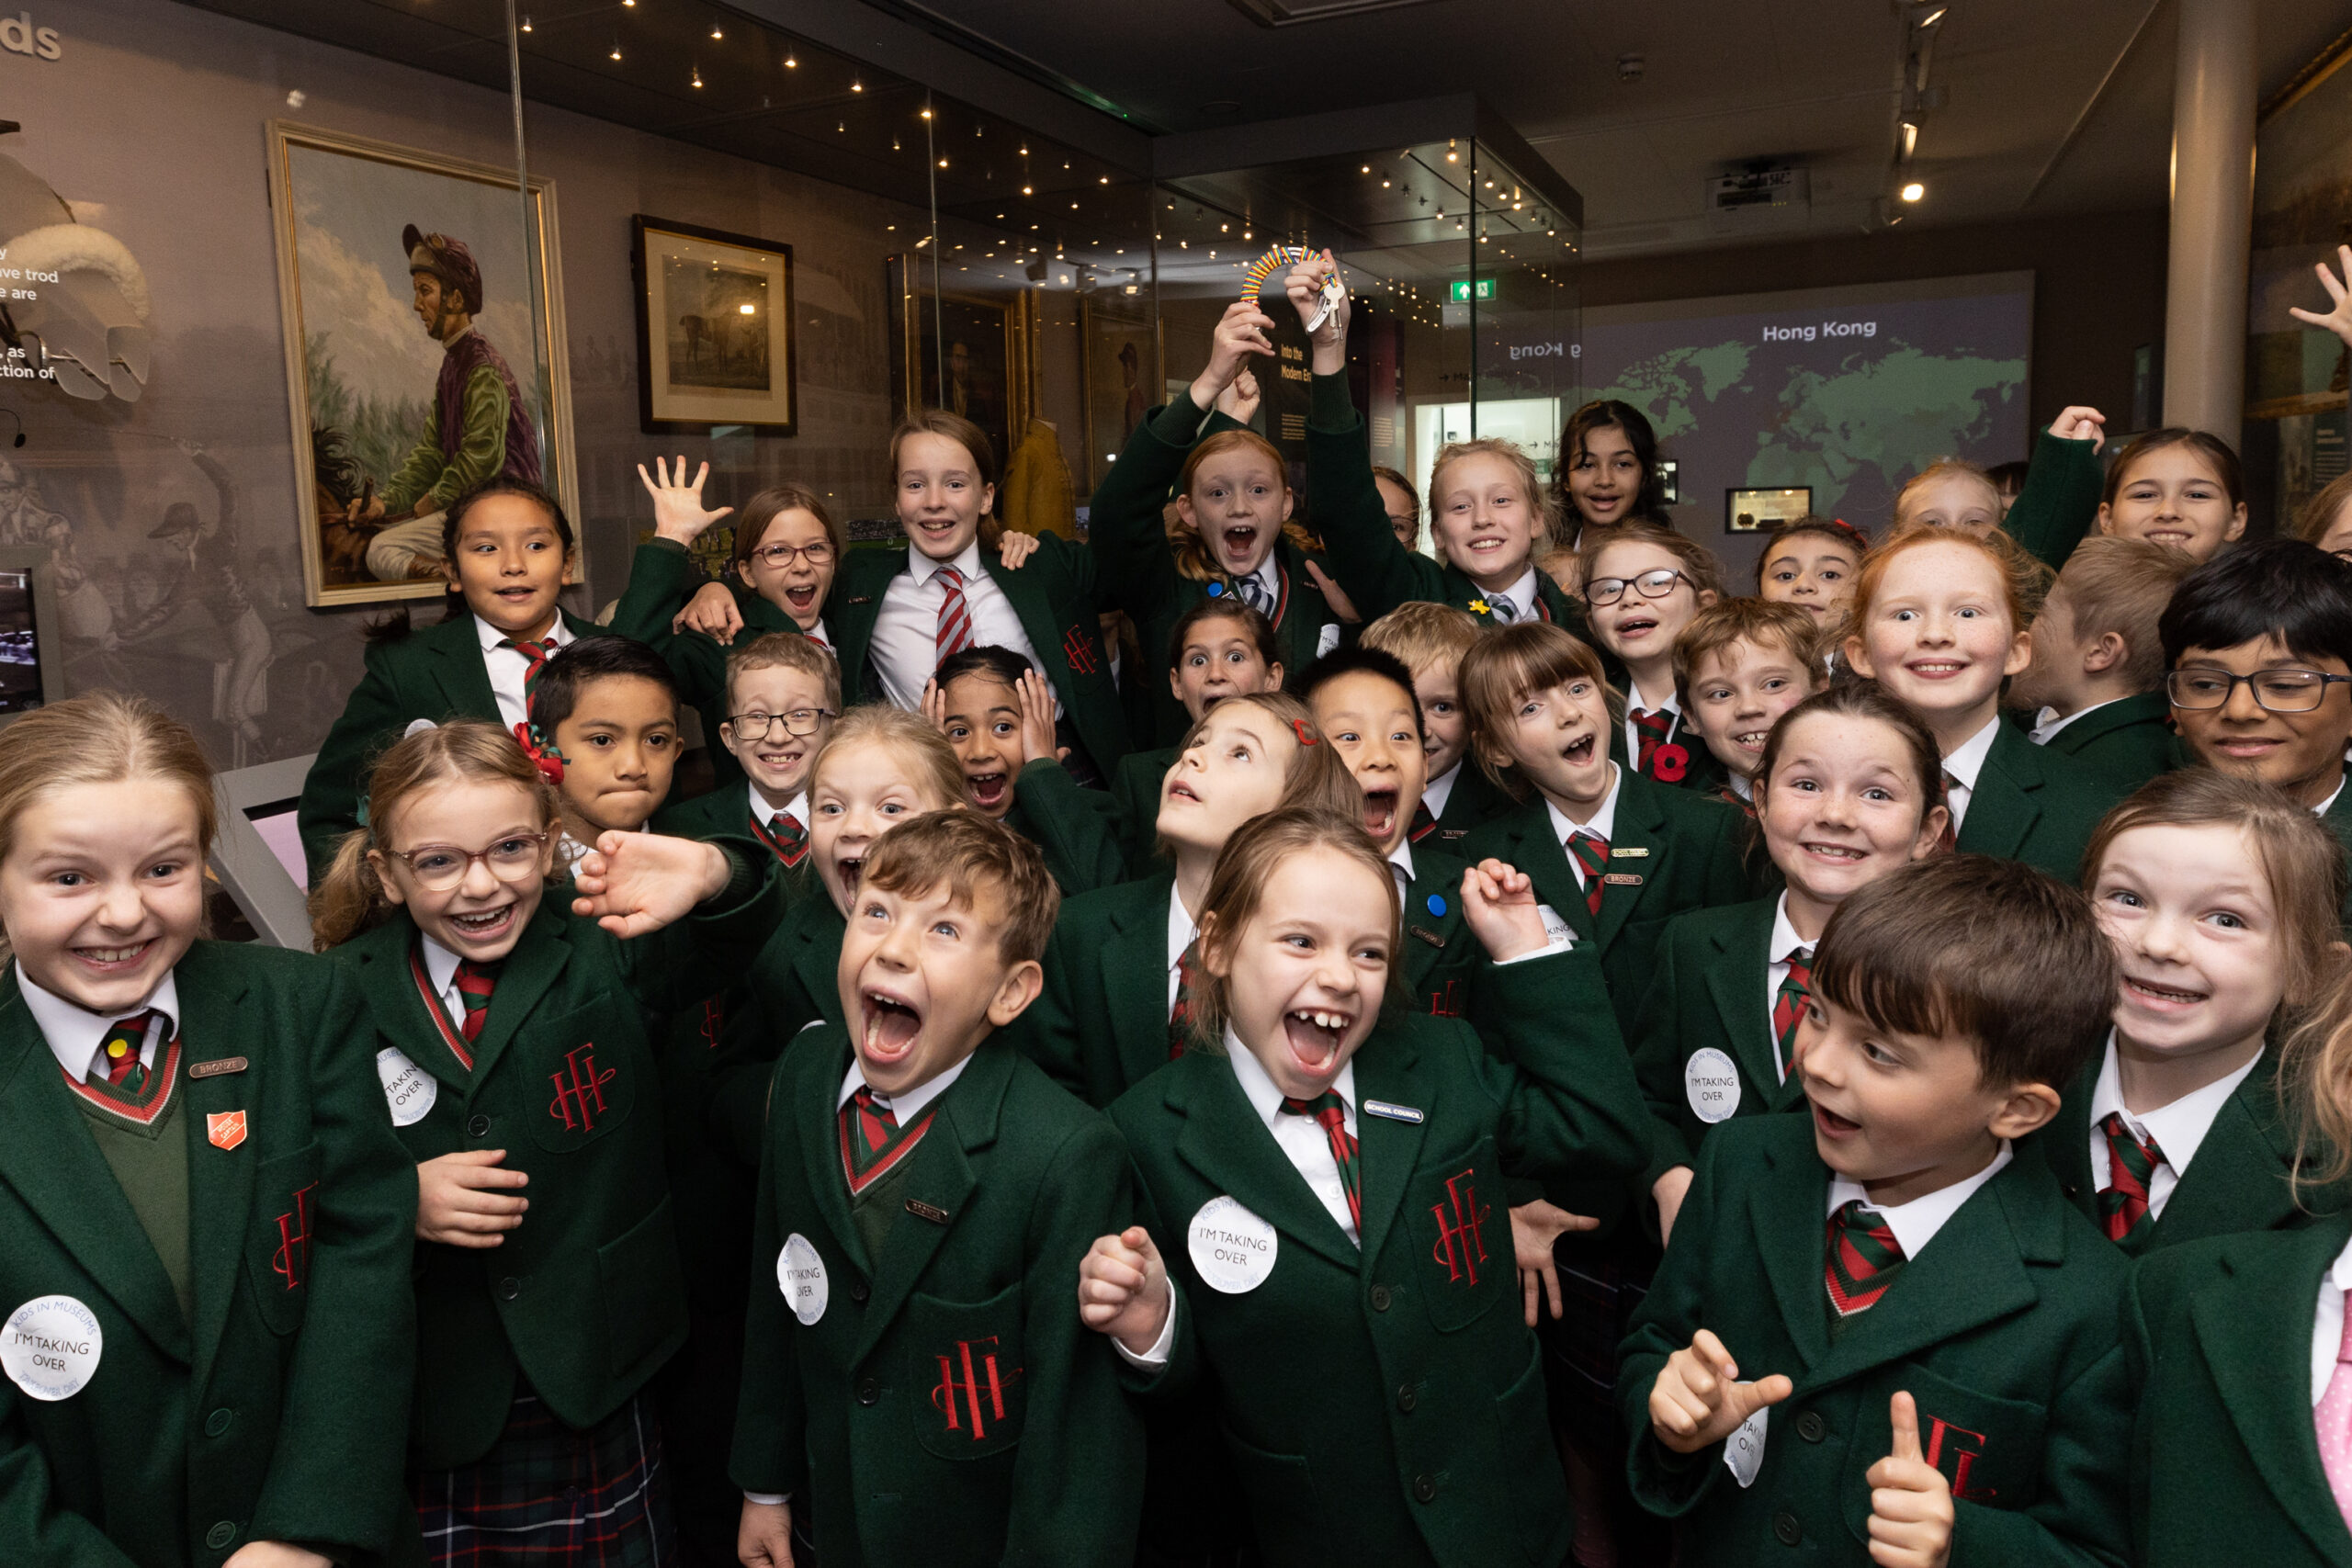 A group of excited grinning children inside a gallery at the National Horseracing Museum with glass museum cases behind them. Two children at the back of the image hold up a horseshoe shaped set of keys in the air. They are wearing stickers reading 'I'm taking over'.